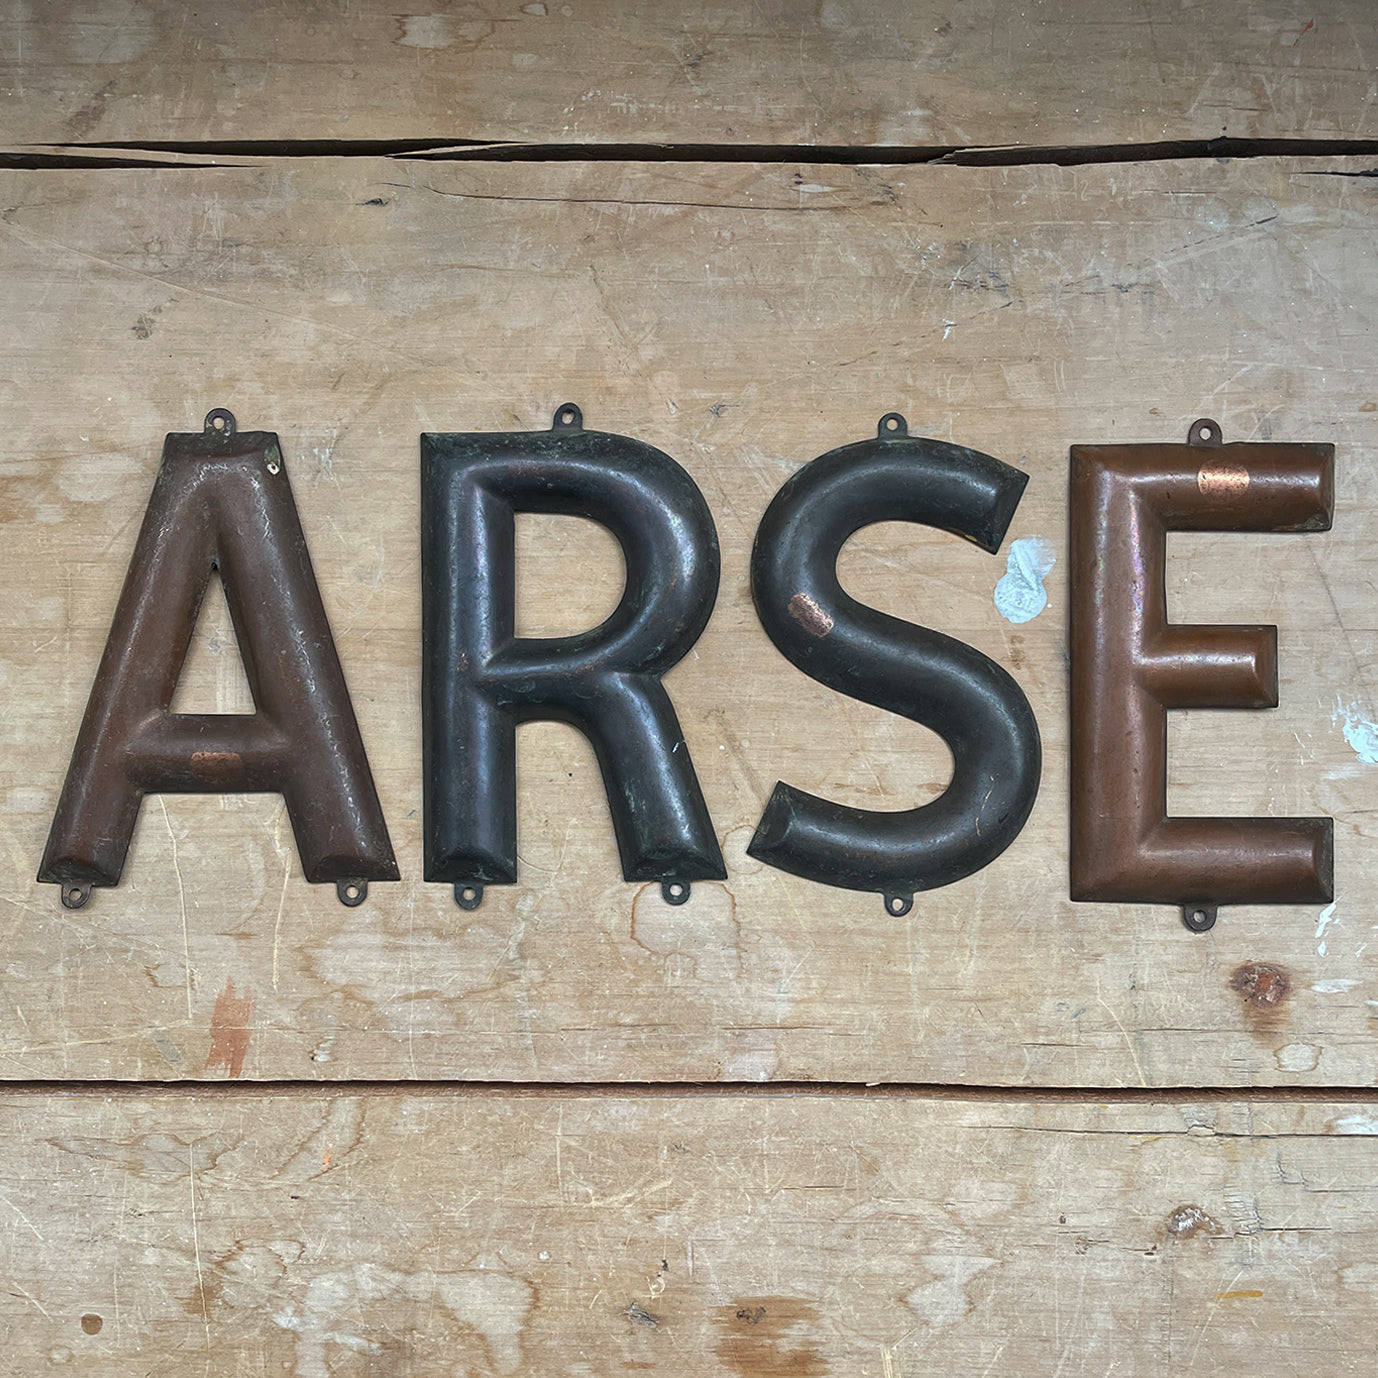 A selection of ten Vintage Copper Letters. Each one has small eyelets making them easy to hang on the wall. Lovely aged colour and patina to each. What words will you make?!! The collection consists of... 1xA 2xE 2xI 1xN 2xR 2xS - SHOP NOW - www.intovintage.co.uk